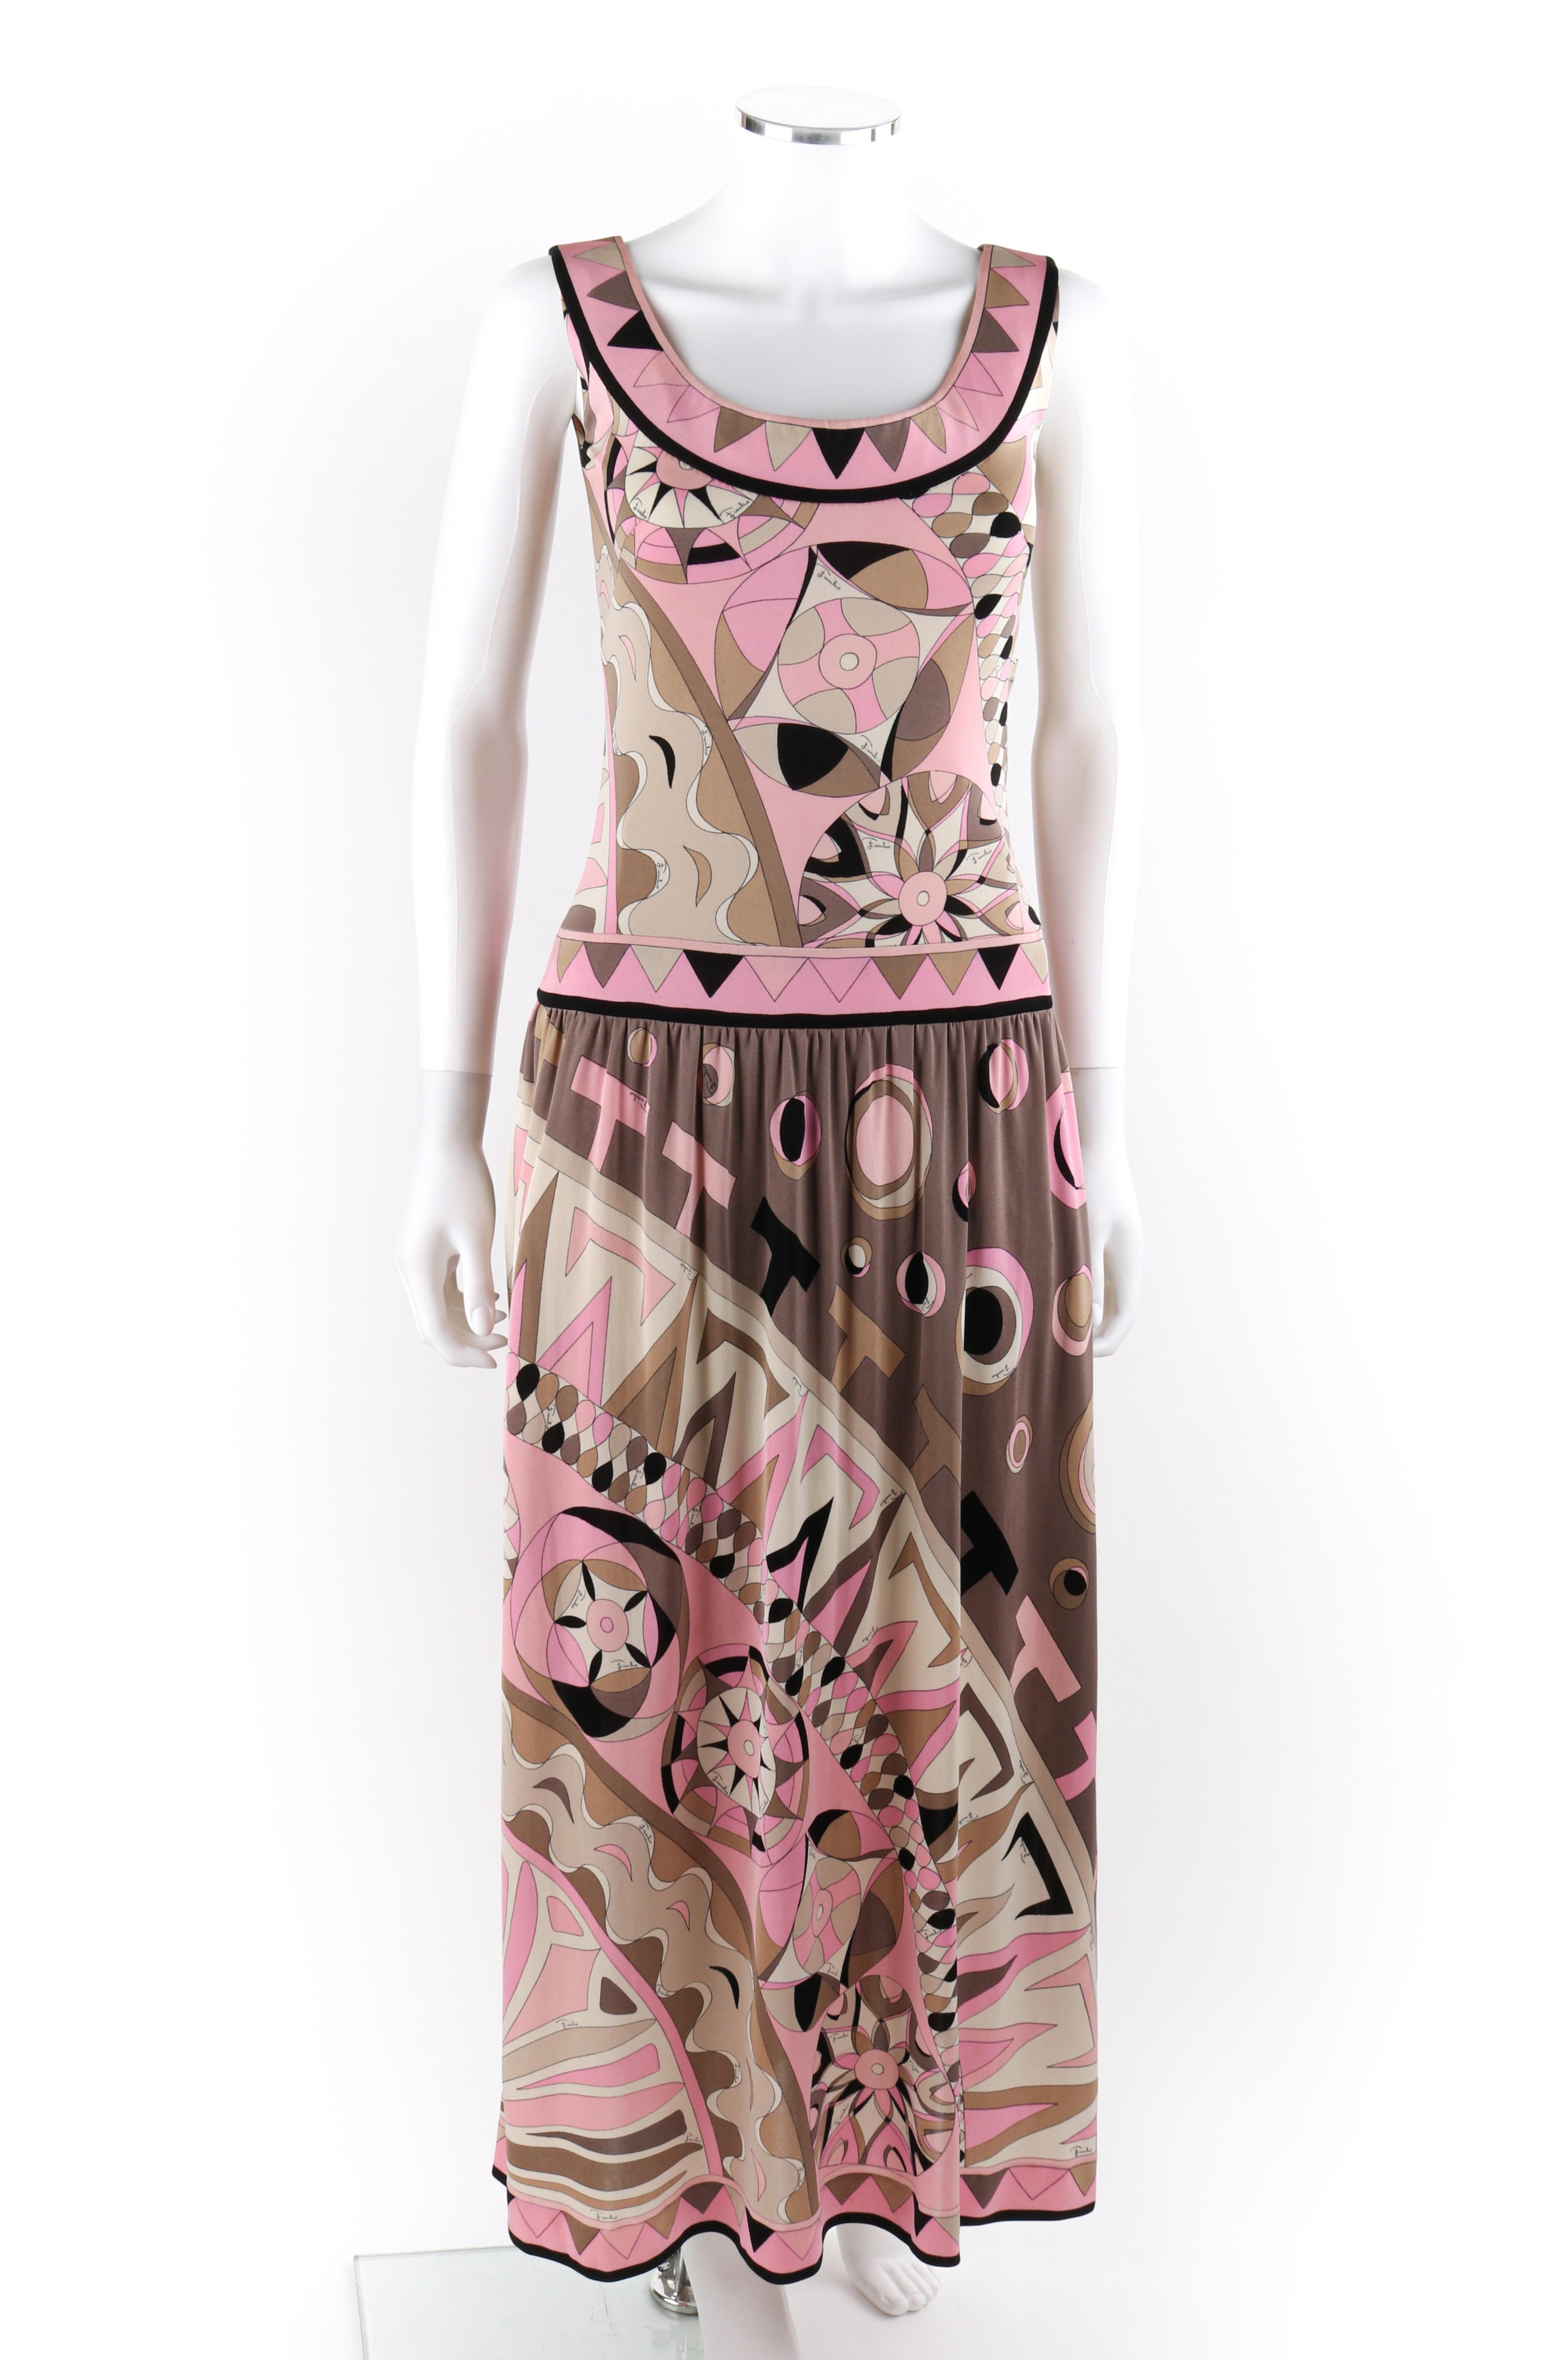 EMILIO PUCCI c.1960's Circular Op Art Signature Print Silk Drop Waist Maxi Dress
 
Circa: 1960’s
Label(s): Emilio Pucci, Exclusively for Saks Fifth Avenue
Designer: Emilio Pucci
Style: Maxi dress
Color(s): Shades of pink, brown, white, black